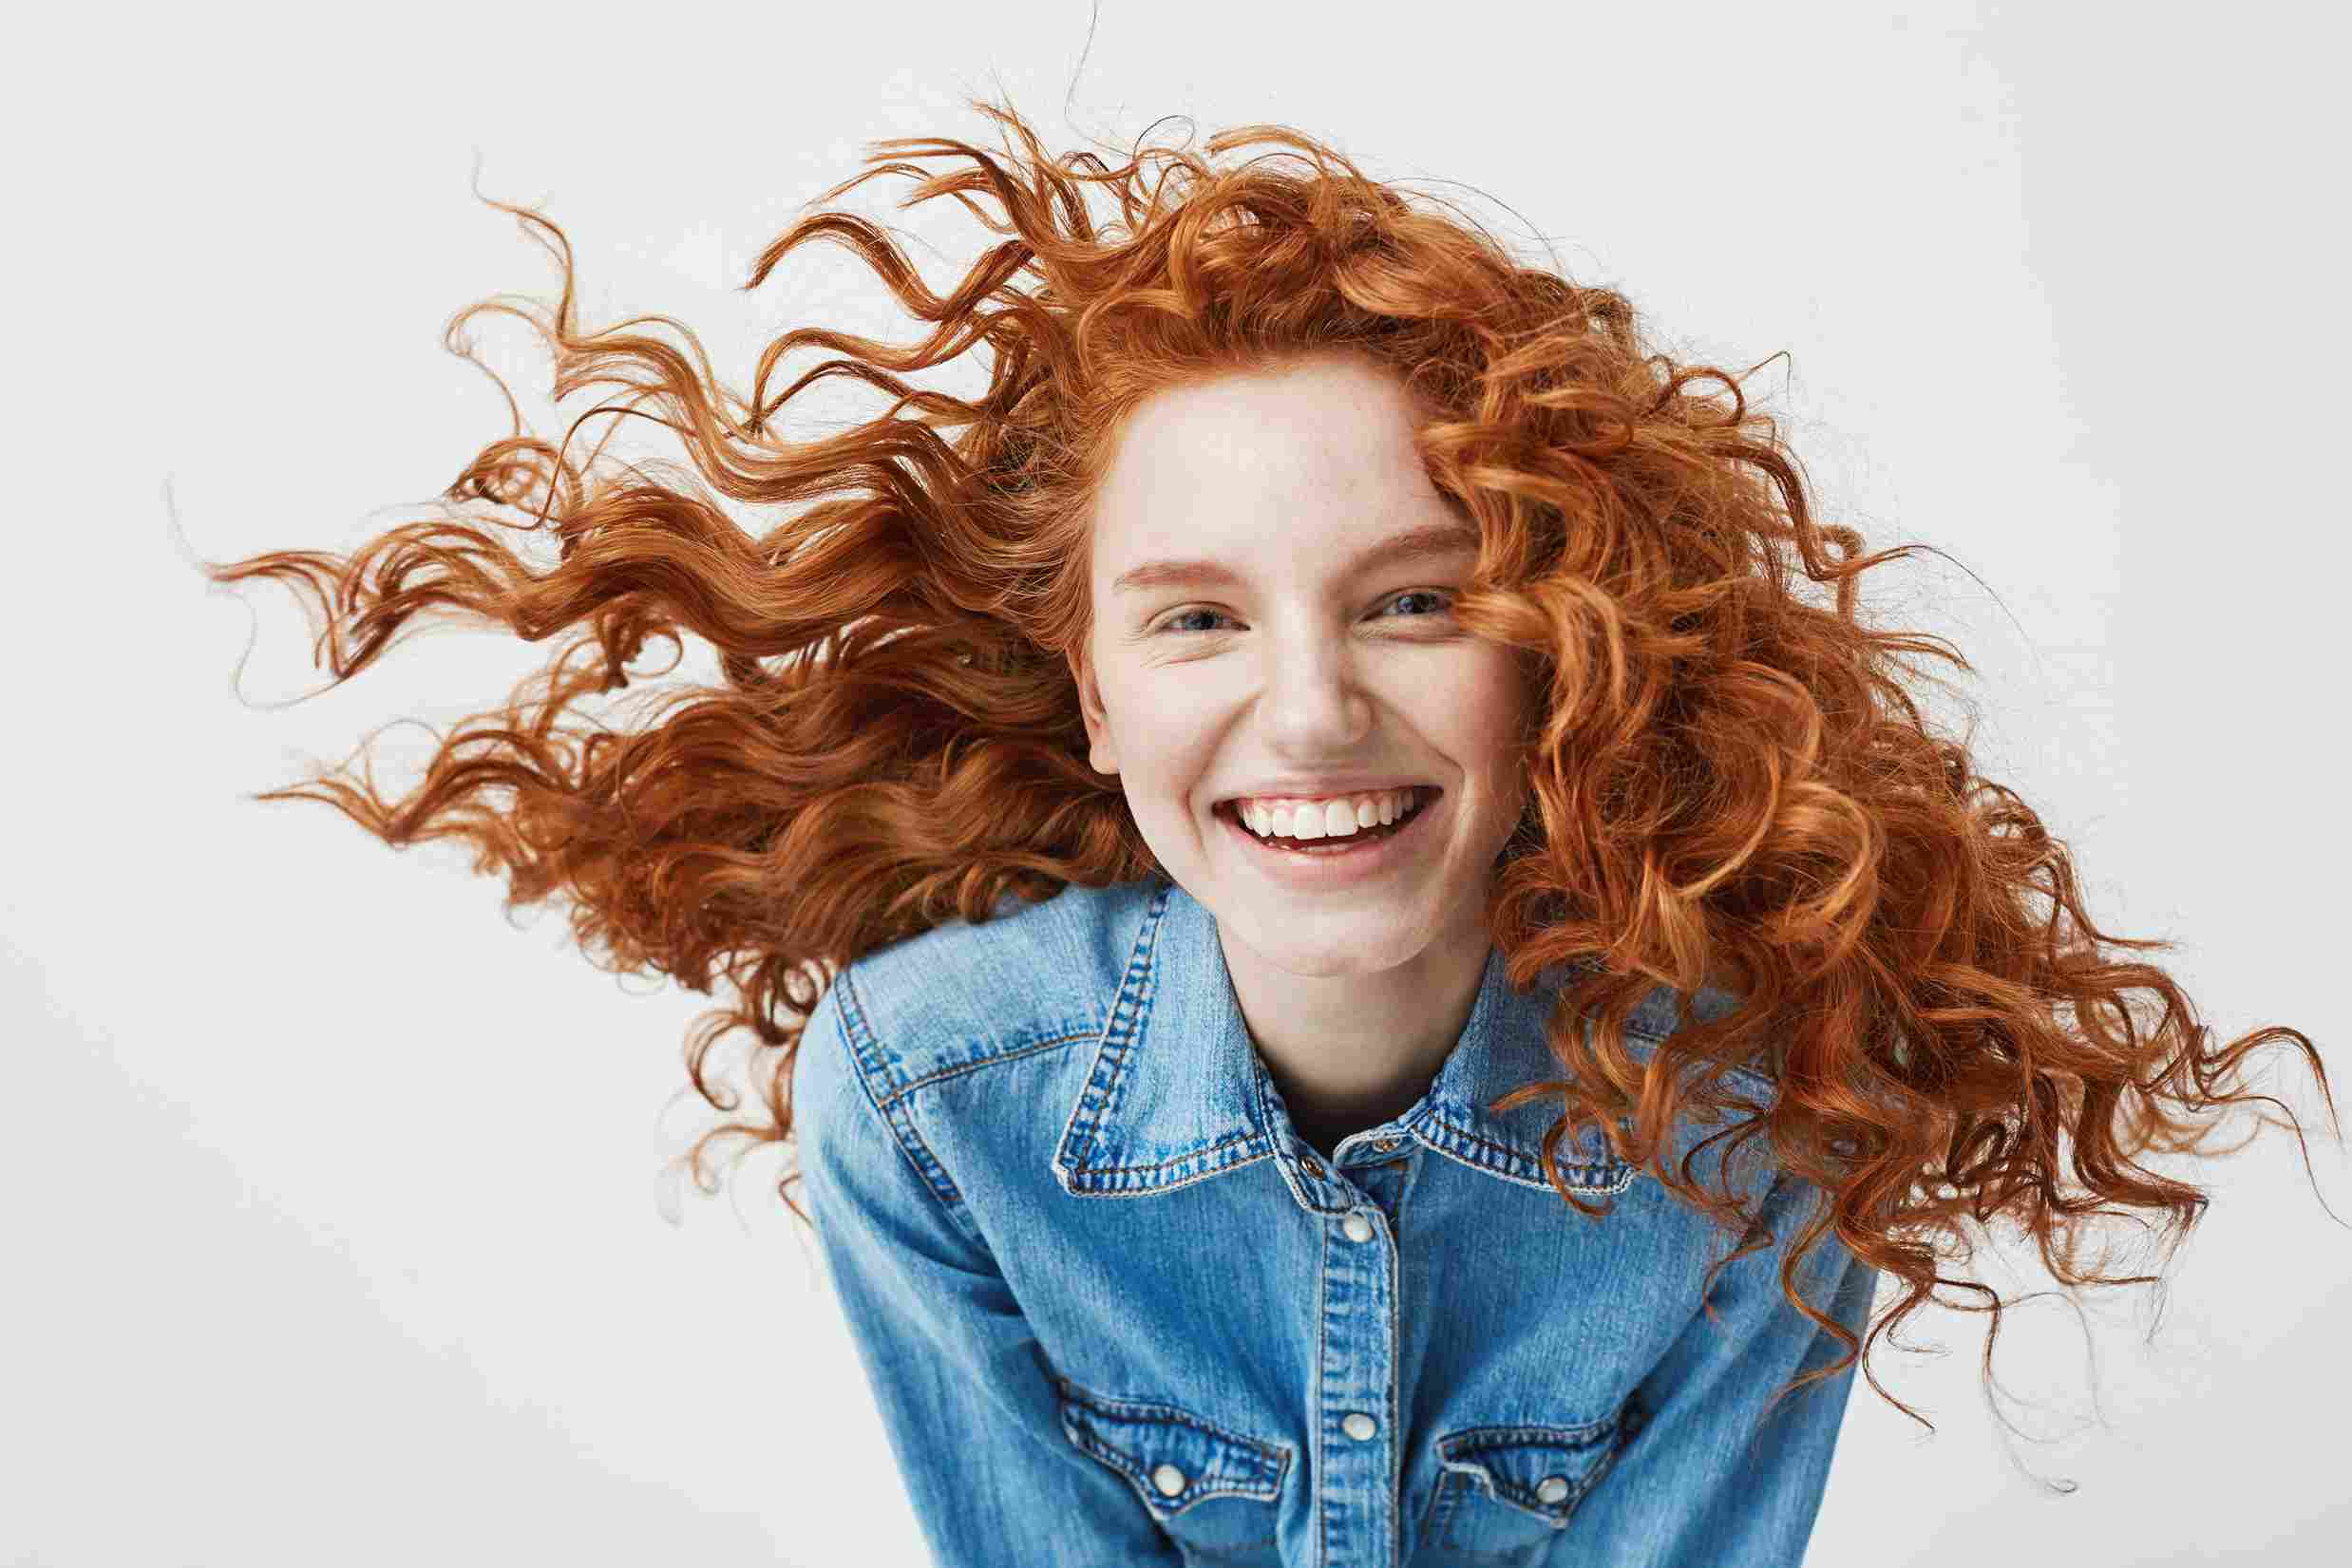 portrait beautiful cheerful redhead woman with flying curly hair smiling laughing 11zon